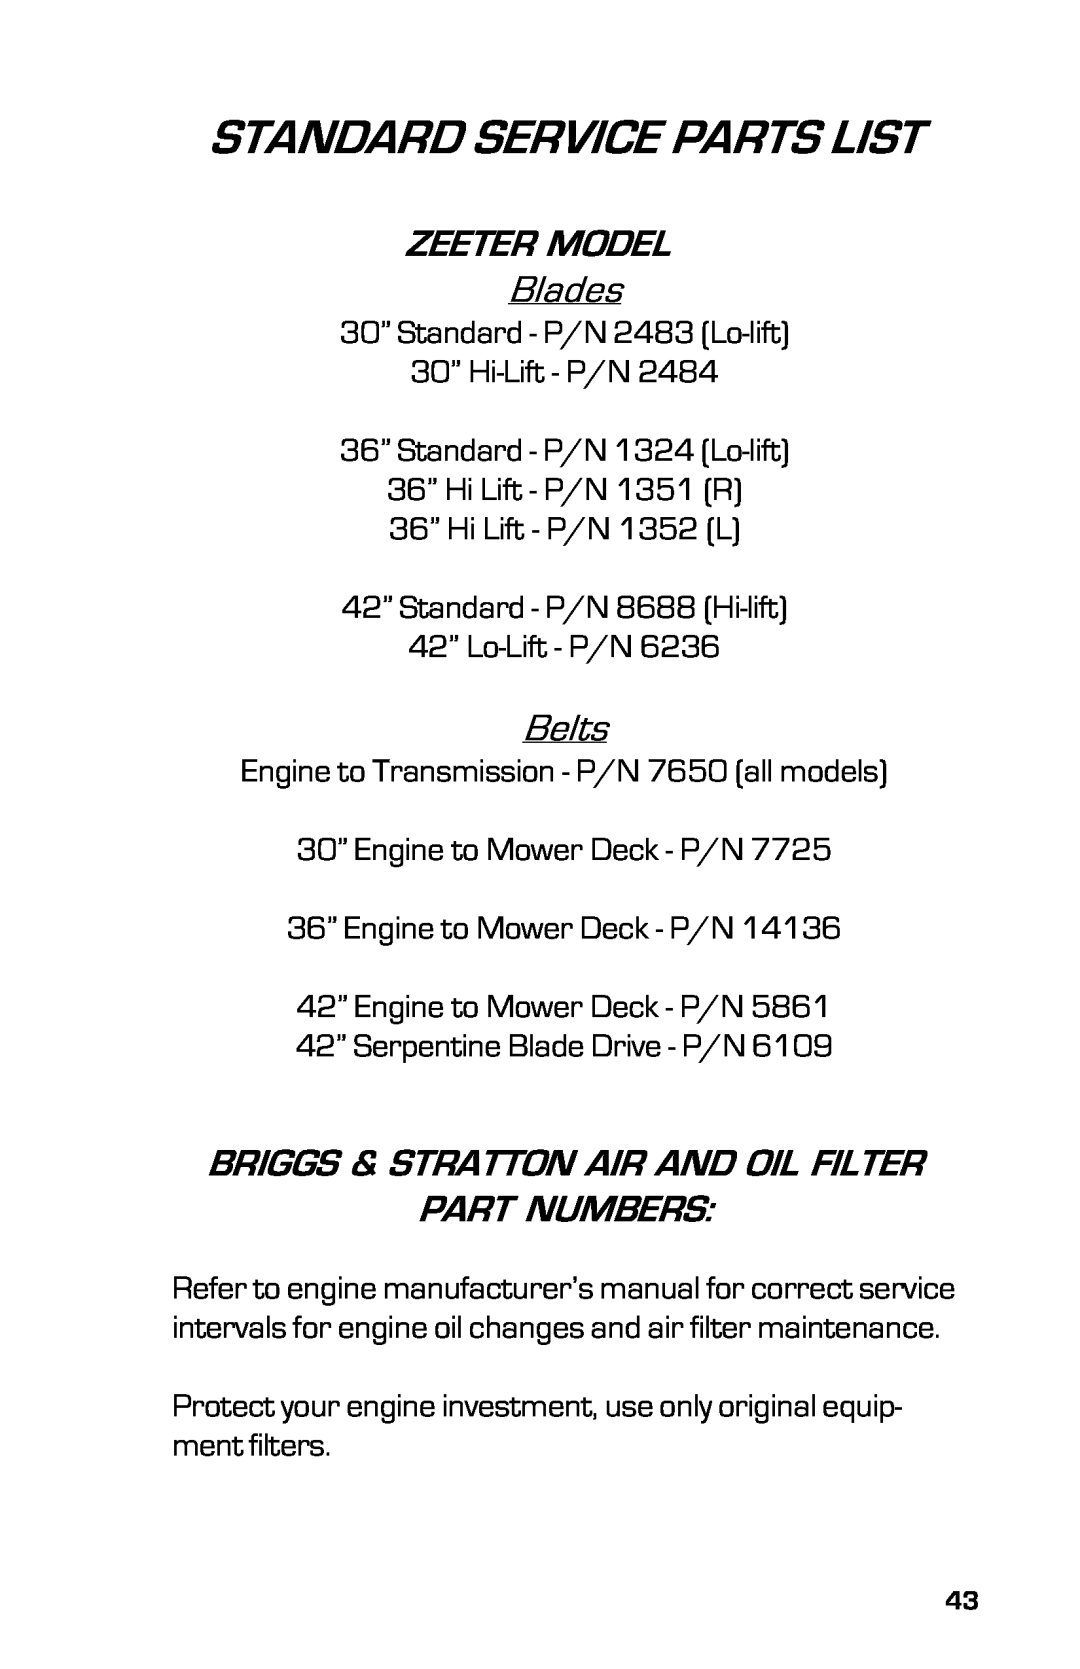 Dixon 2004 Standard Service Parts List, ZEETER MODEL Blades, Belts, Briggs & Stratton Air And Oil Filter Part Numbers 